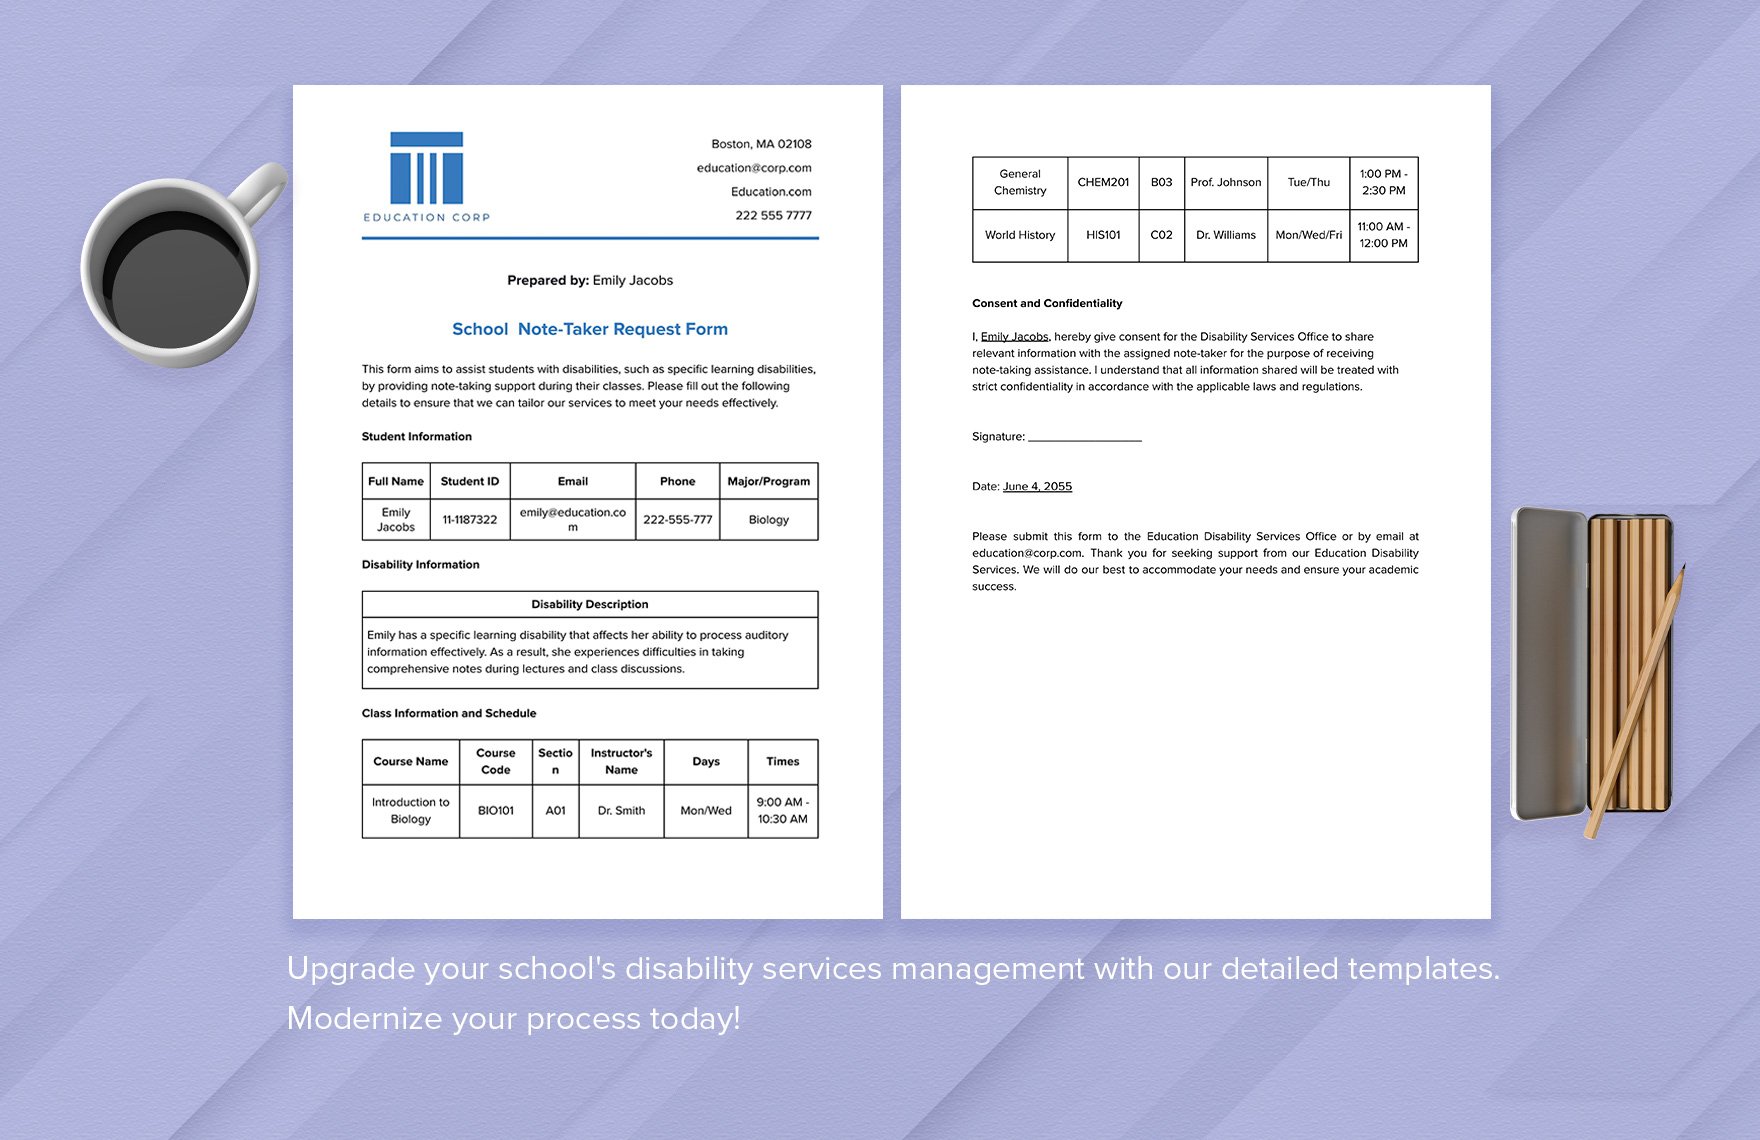 School Note-Taker Request Form Template